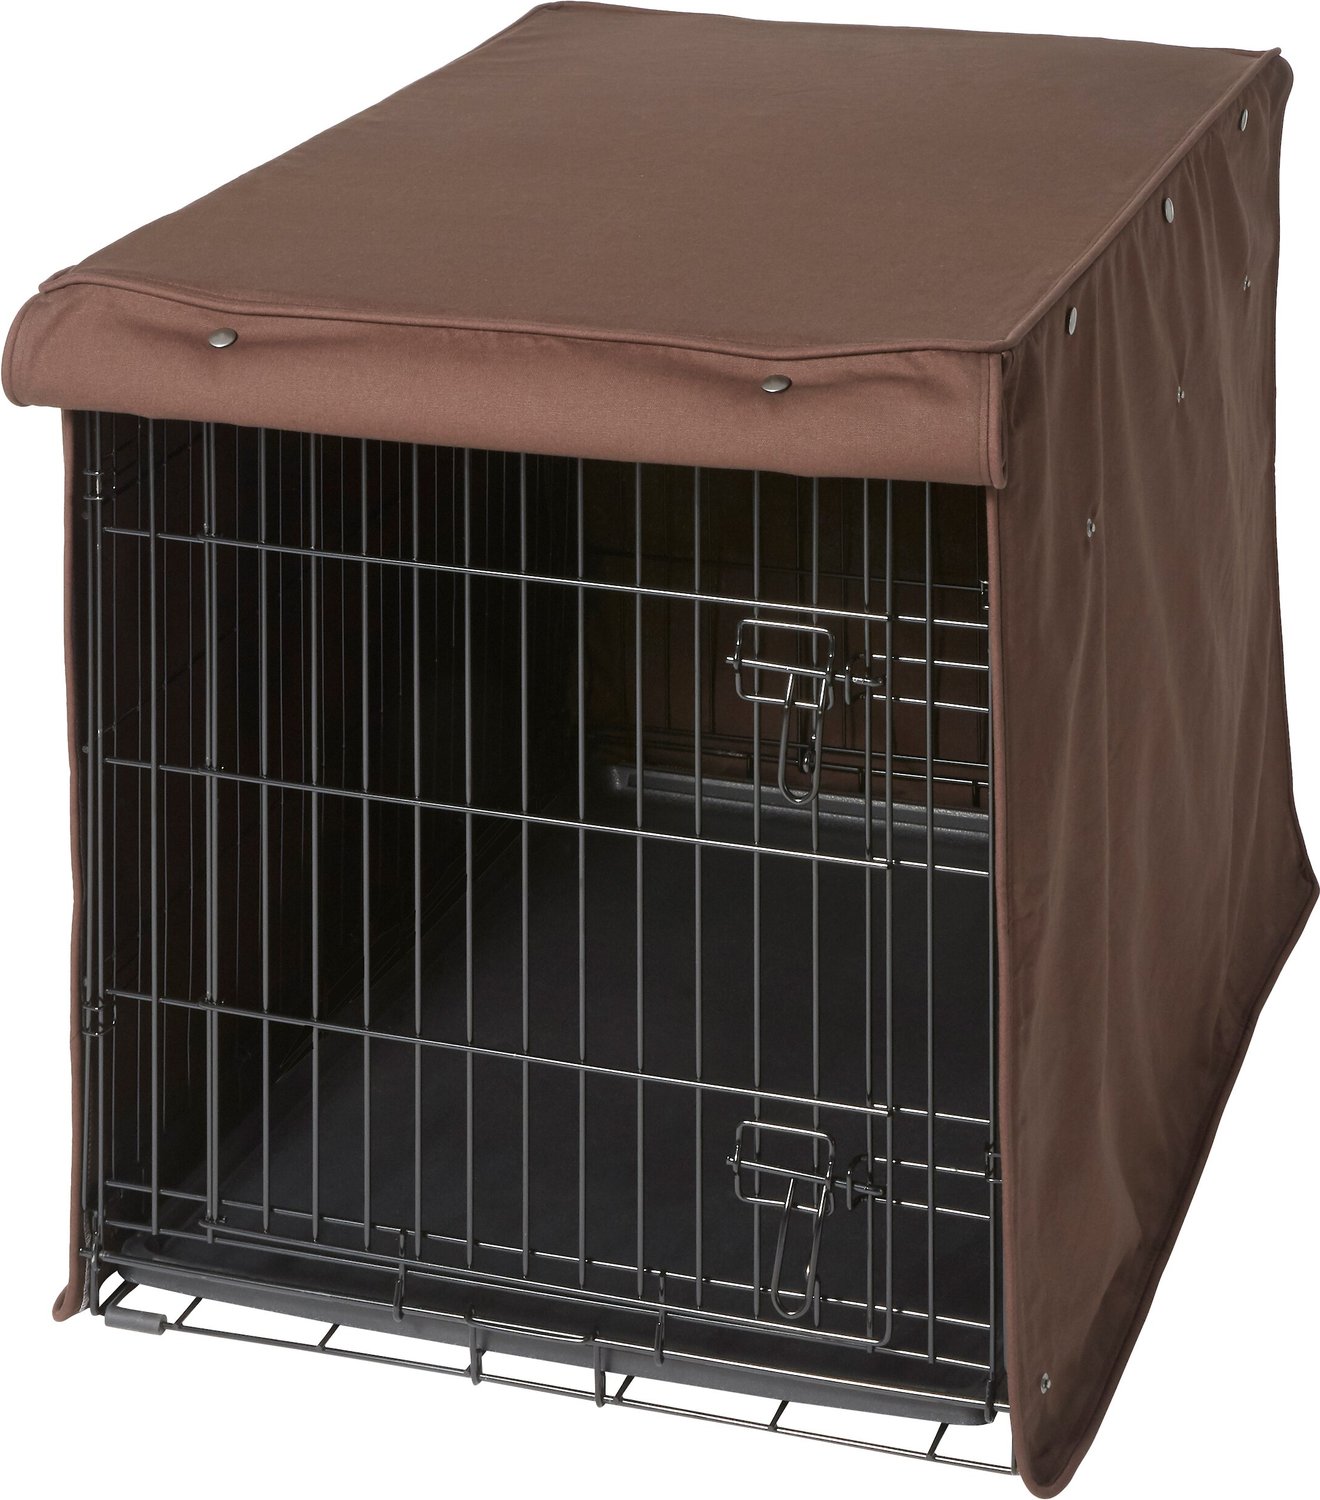 FRISCO Crate Cover, Brown, 36 inch